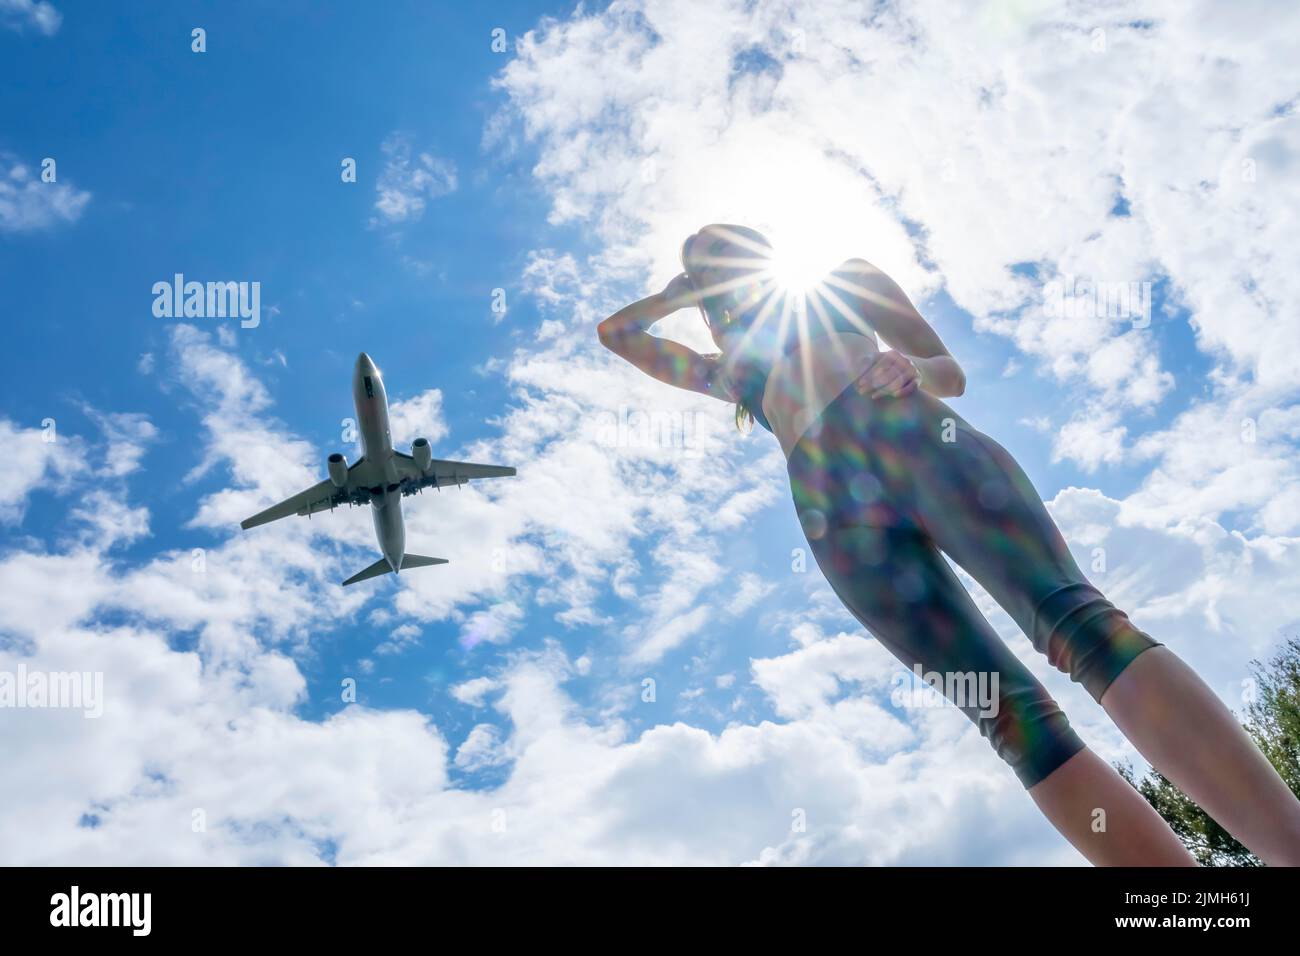 Lovely Blonde Female Traveler Enjoying The Summer Weather As A Commercial Aircraft Flies Overhead Stock Photo